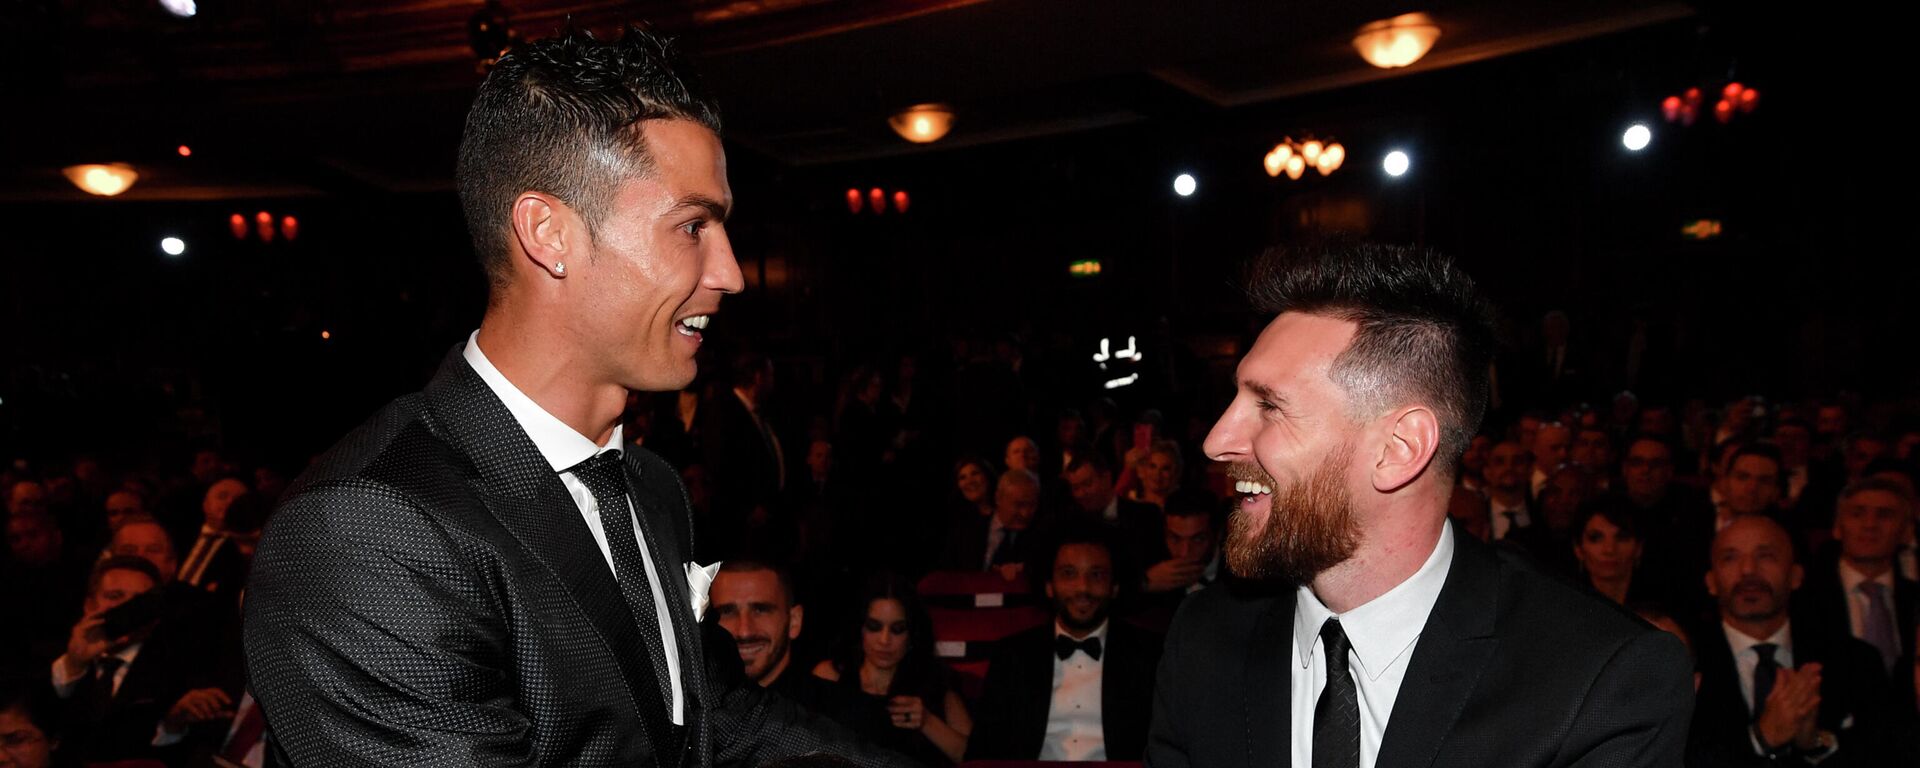 Nominees for the Best FIFA football player, Barcelona and Argentina forward Lionel Messi (R) and Real Madrid and Portugal forward Cristiano Ronaldo (L) chat before taking their seats for The Best FIFA Football Awards ceremony, on October 23, 2017 in London. - Sputnik International, 1920, 28.09.2021